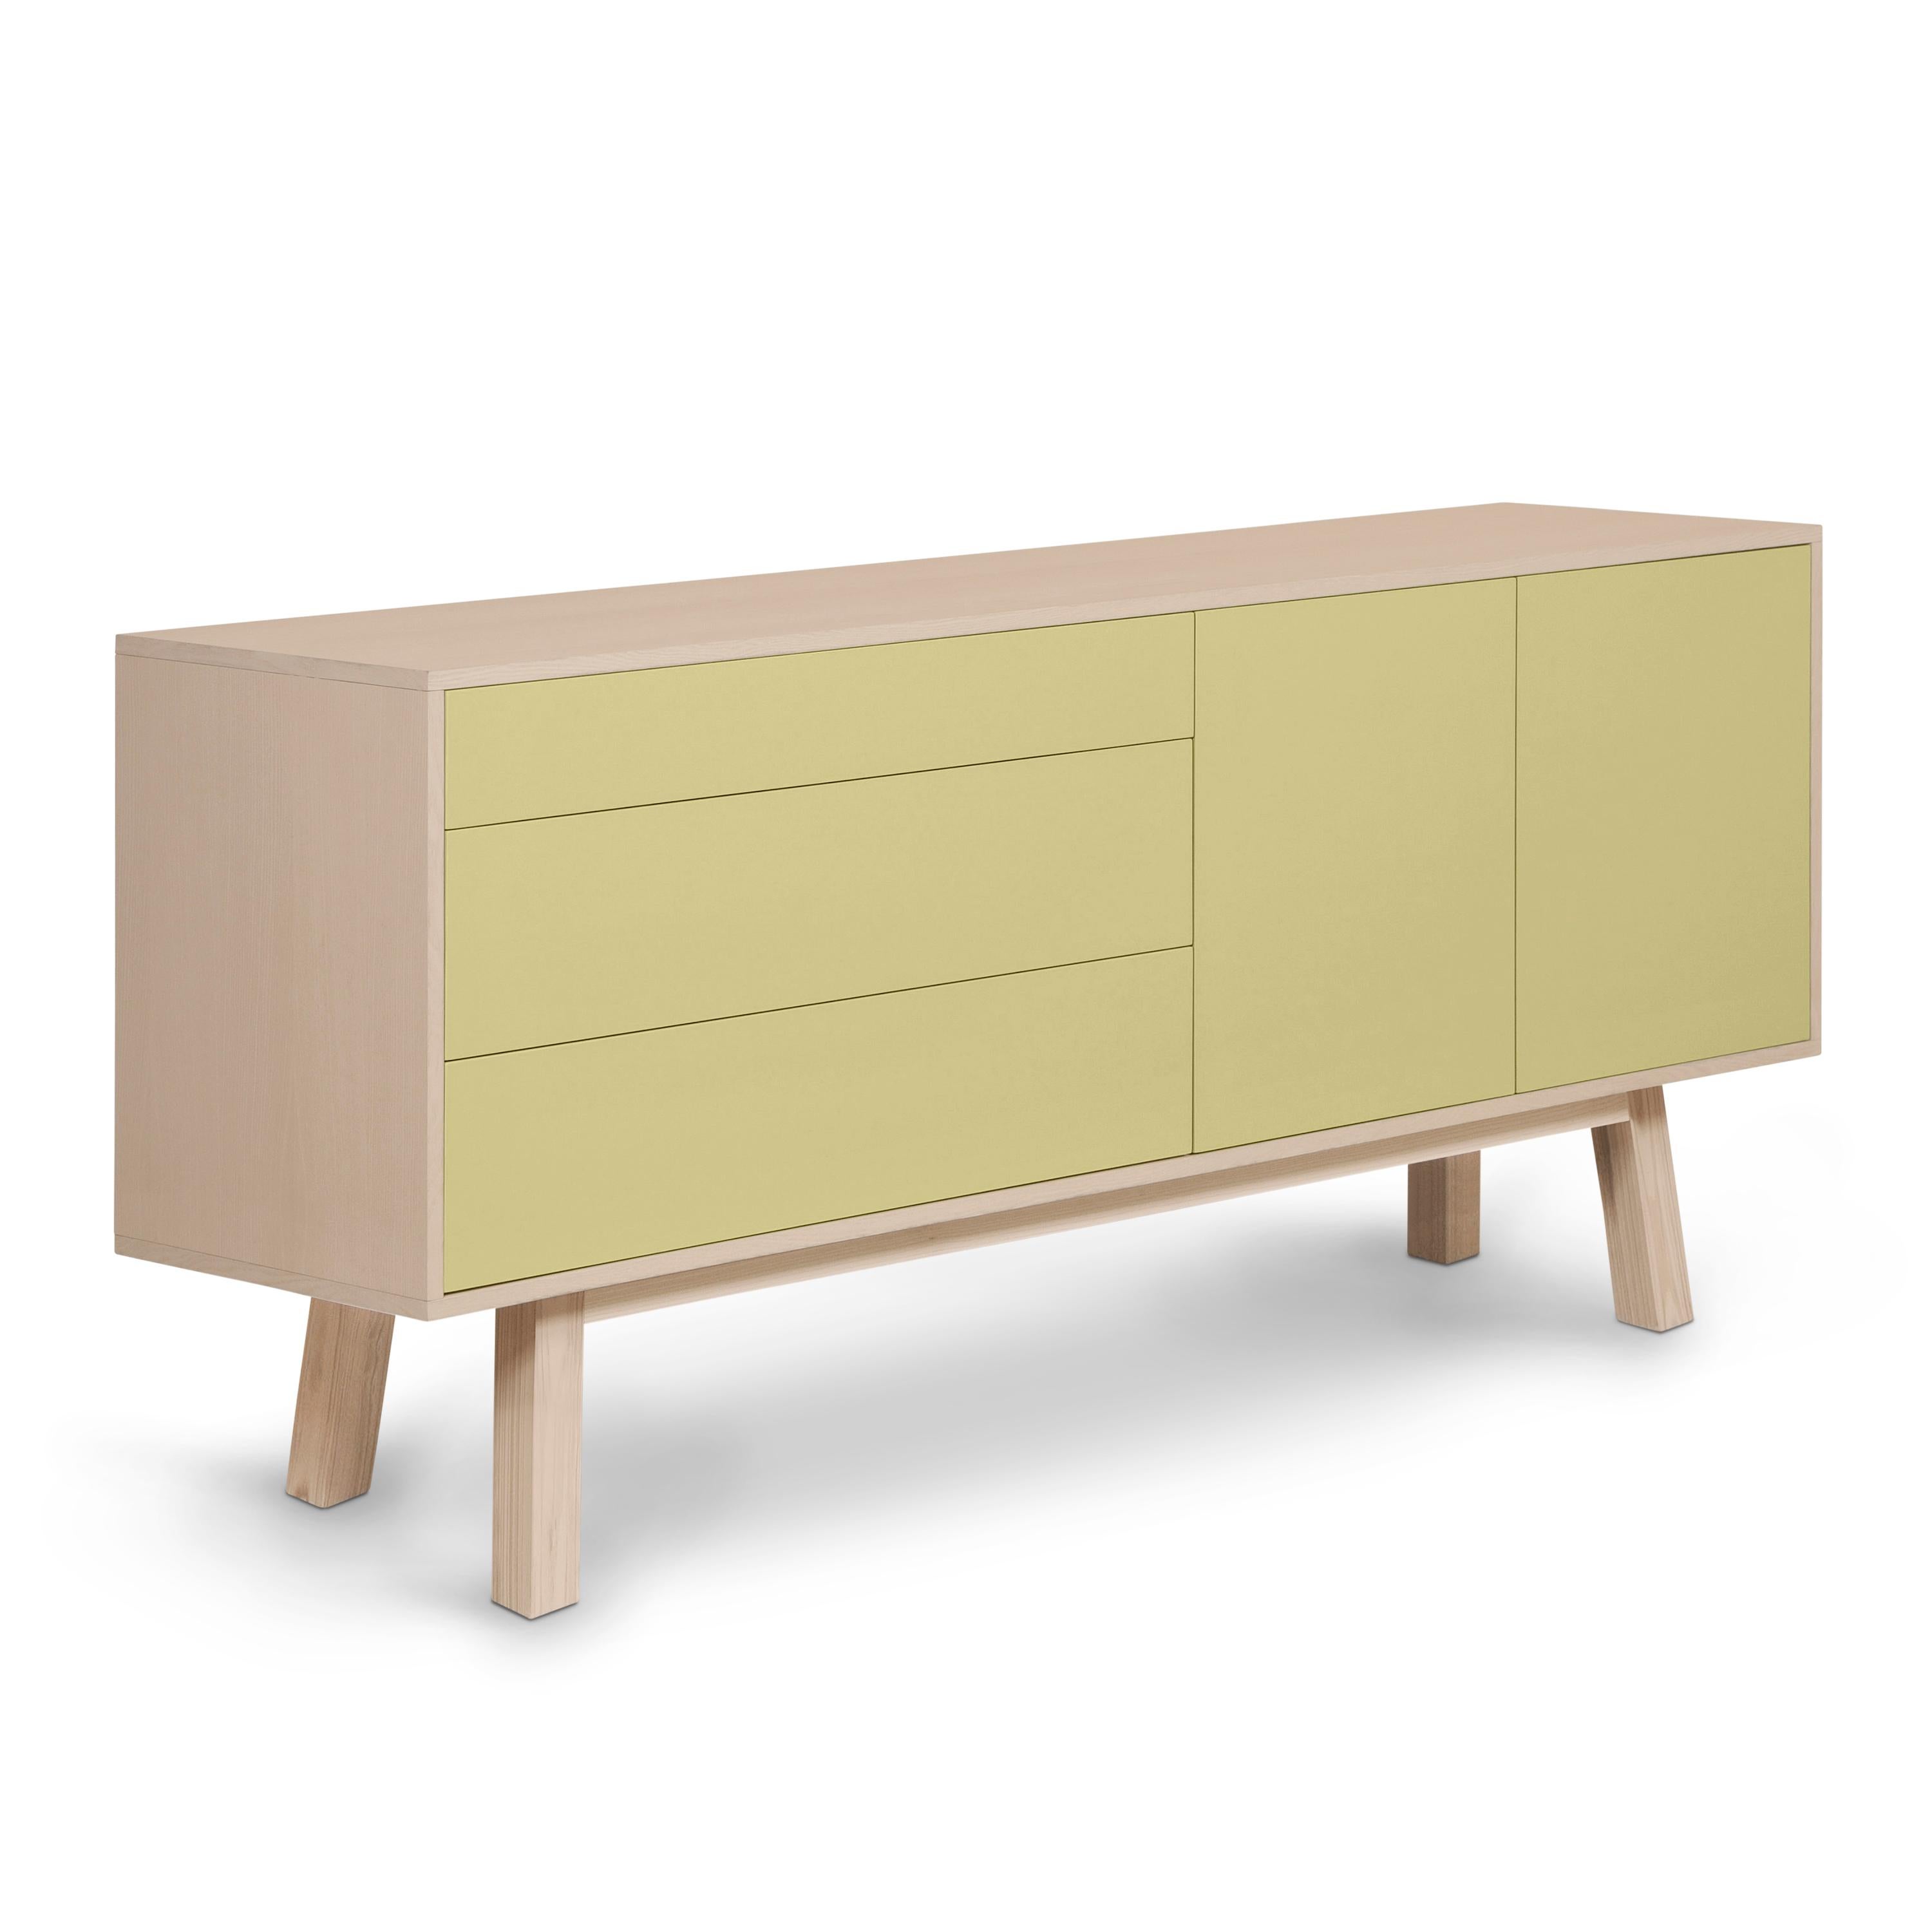 Yellow Higher Sideboard with doors and drawers designed in Paris by E. Gizard For Sale 1